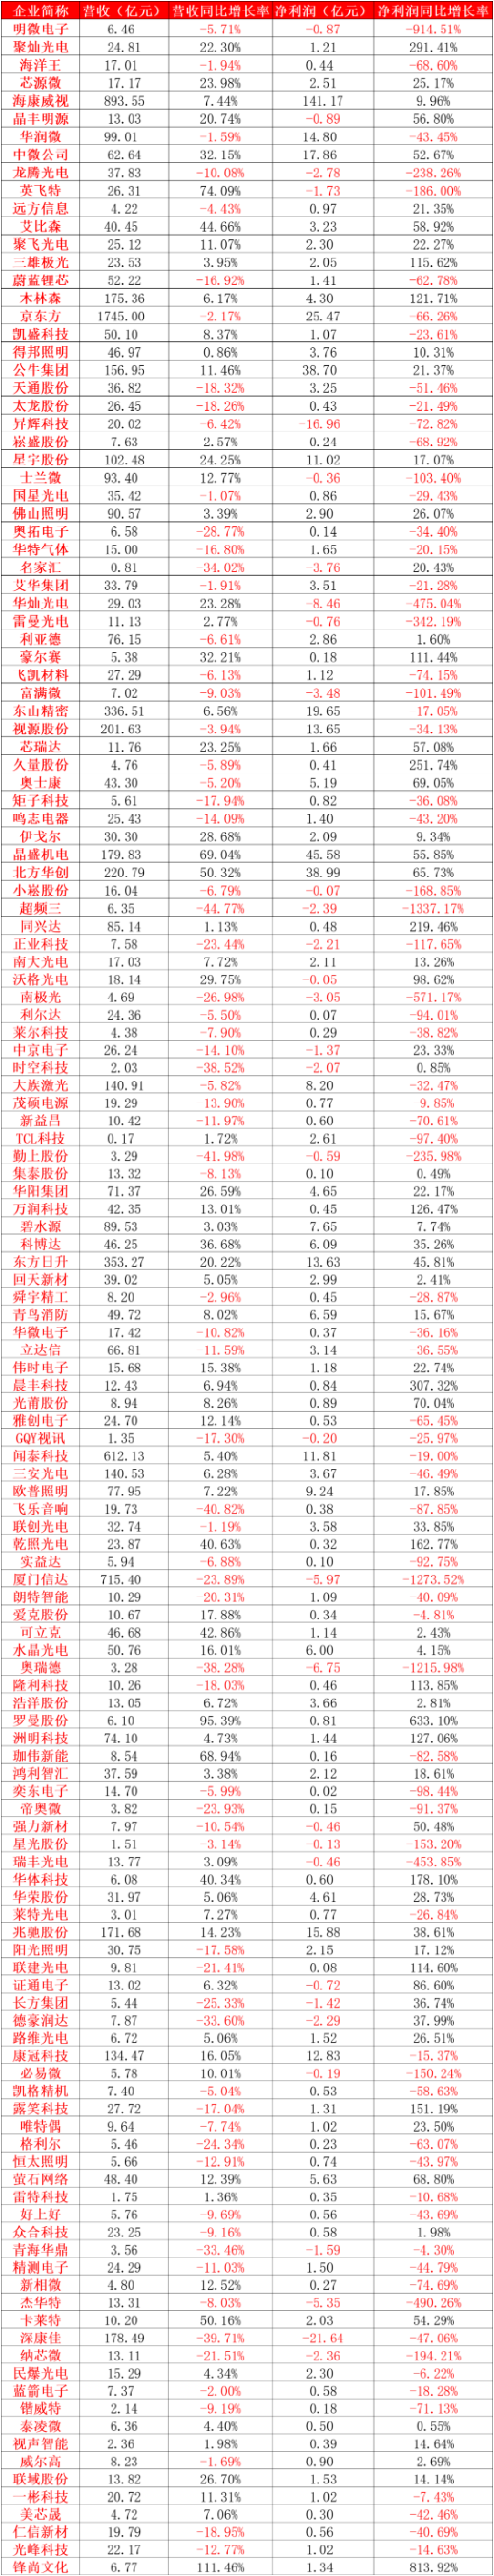 Table of 2023 performance data